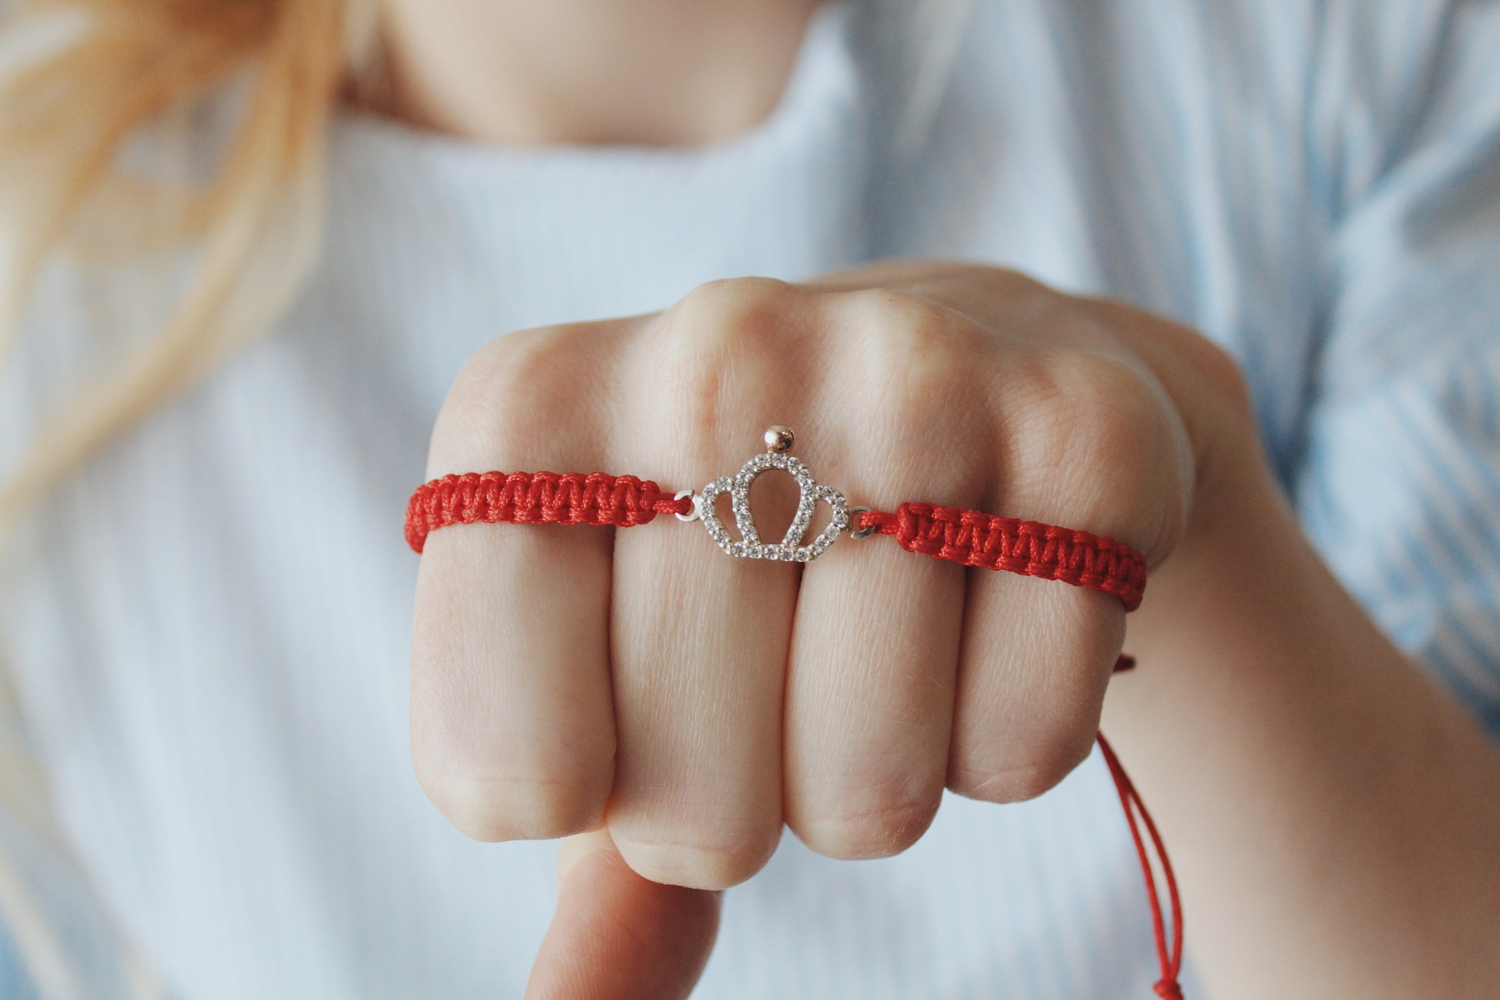 10 Occasions When Giving a Red String Protection Bracelet as a Gift Is Appropriate